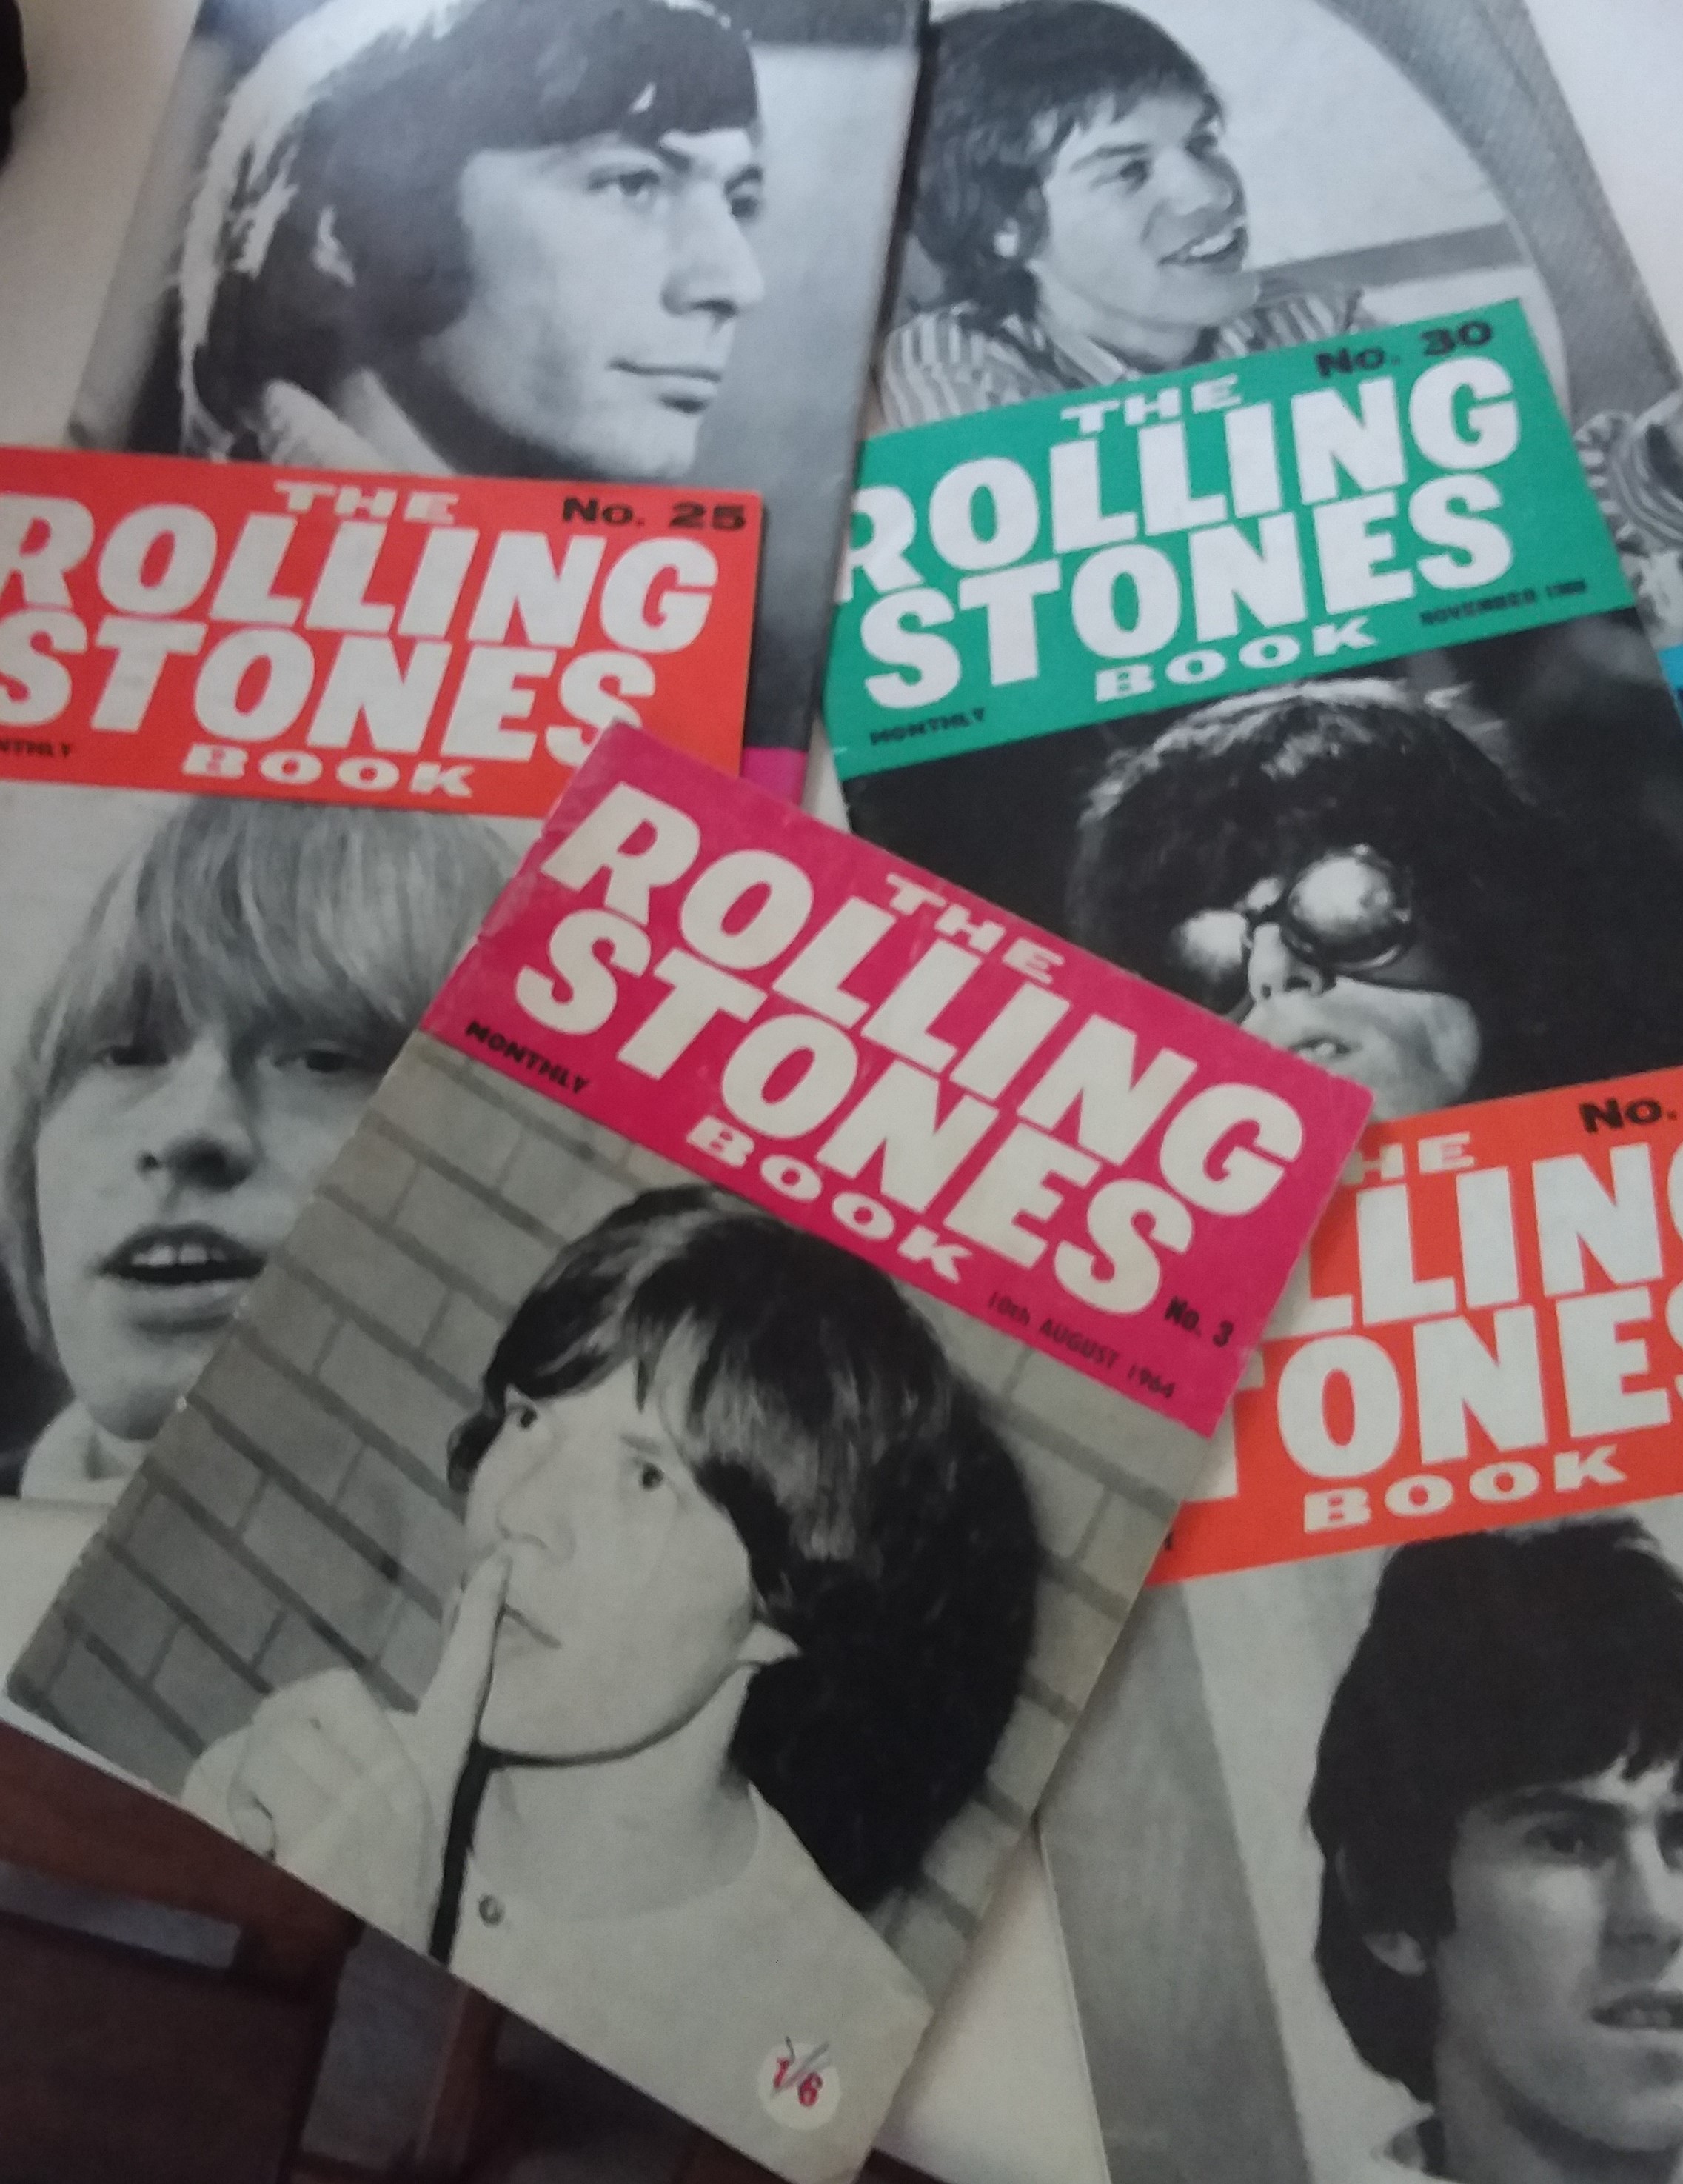 The "Rolling Stones" books came out each month in the 60's keeping their fans informed.